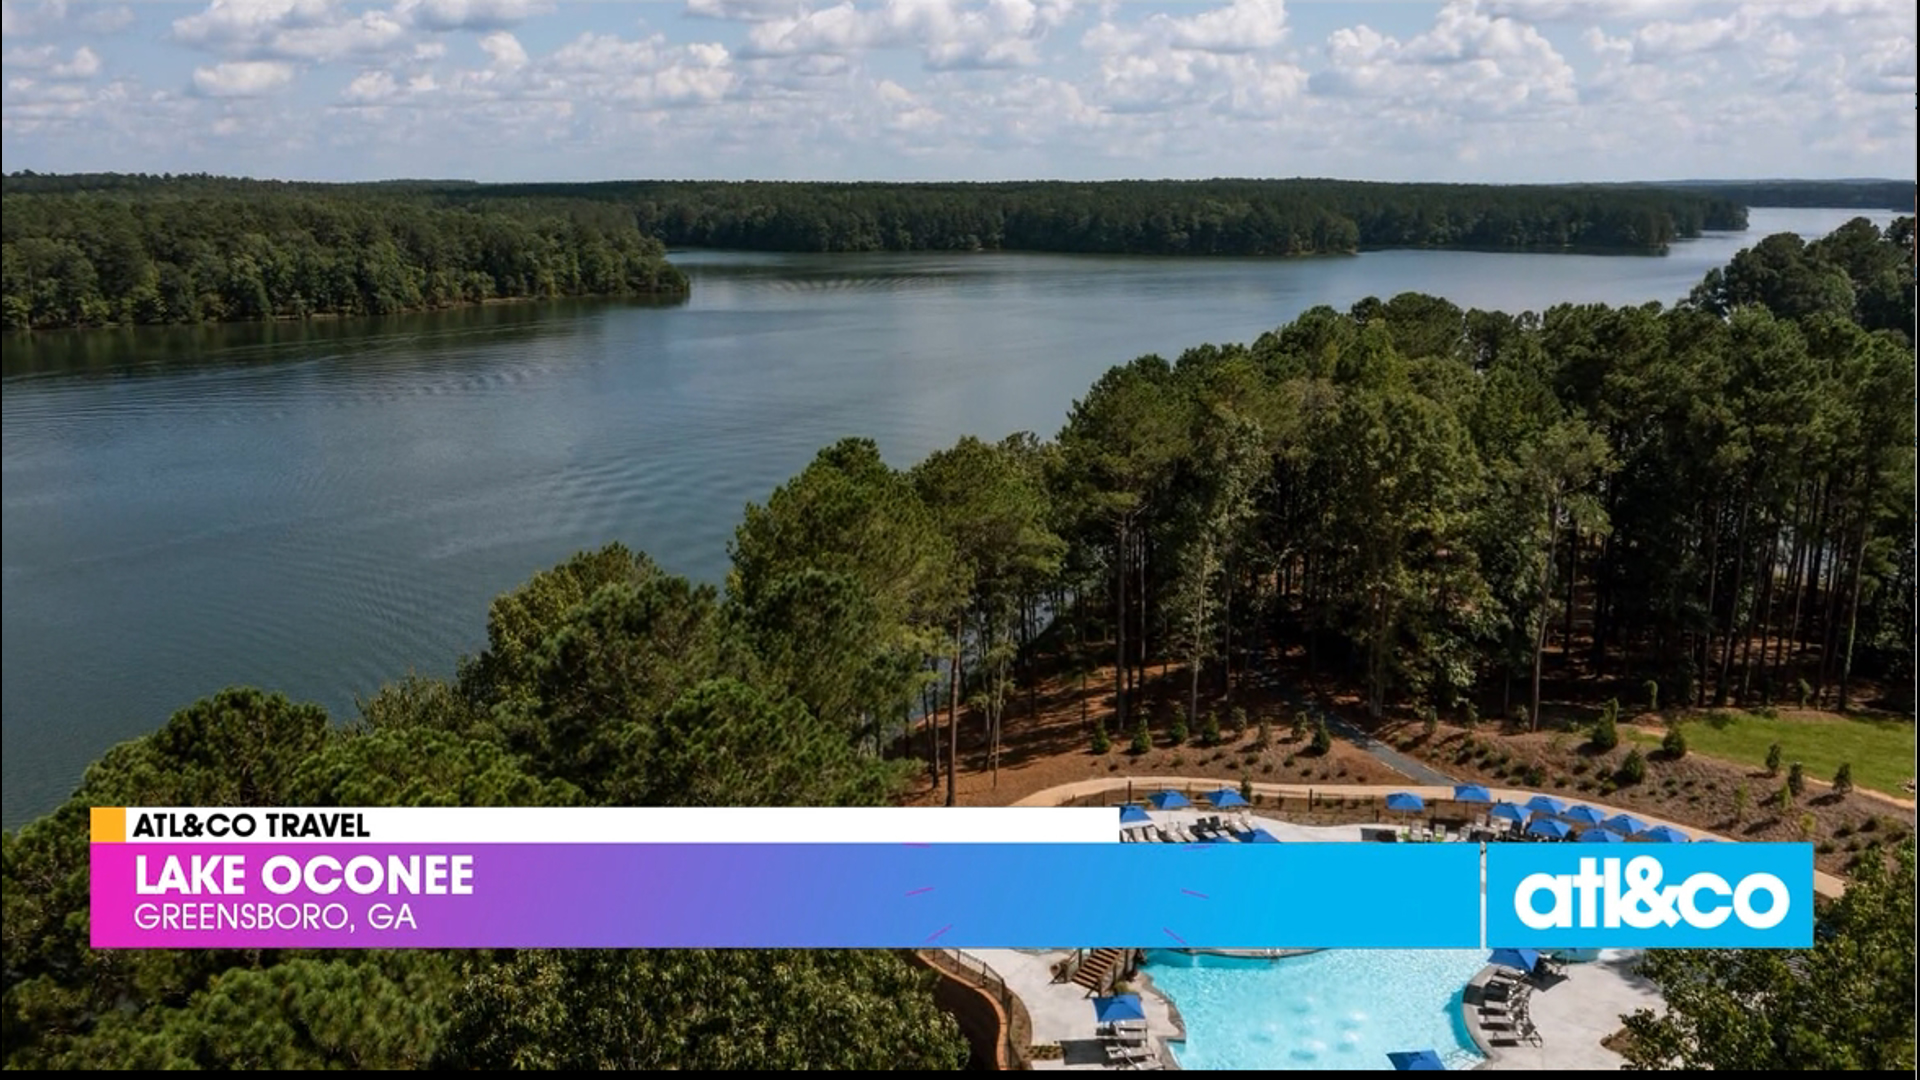 From Lake Blue Ridge to Lake Oconee, check out these beautiful lakes in the Peach State from family travel blogger Kimberly Stroh.